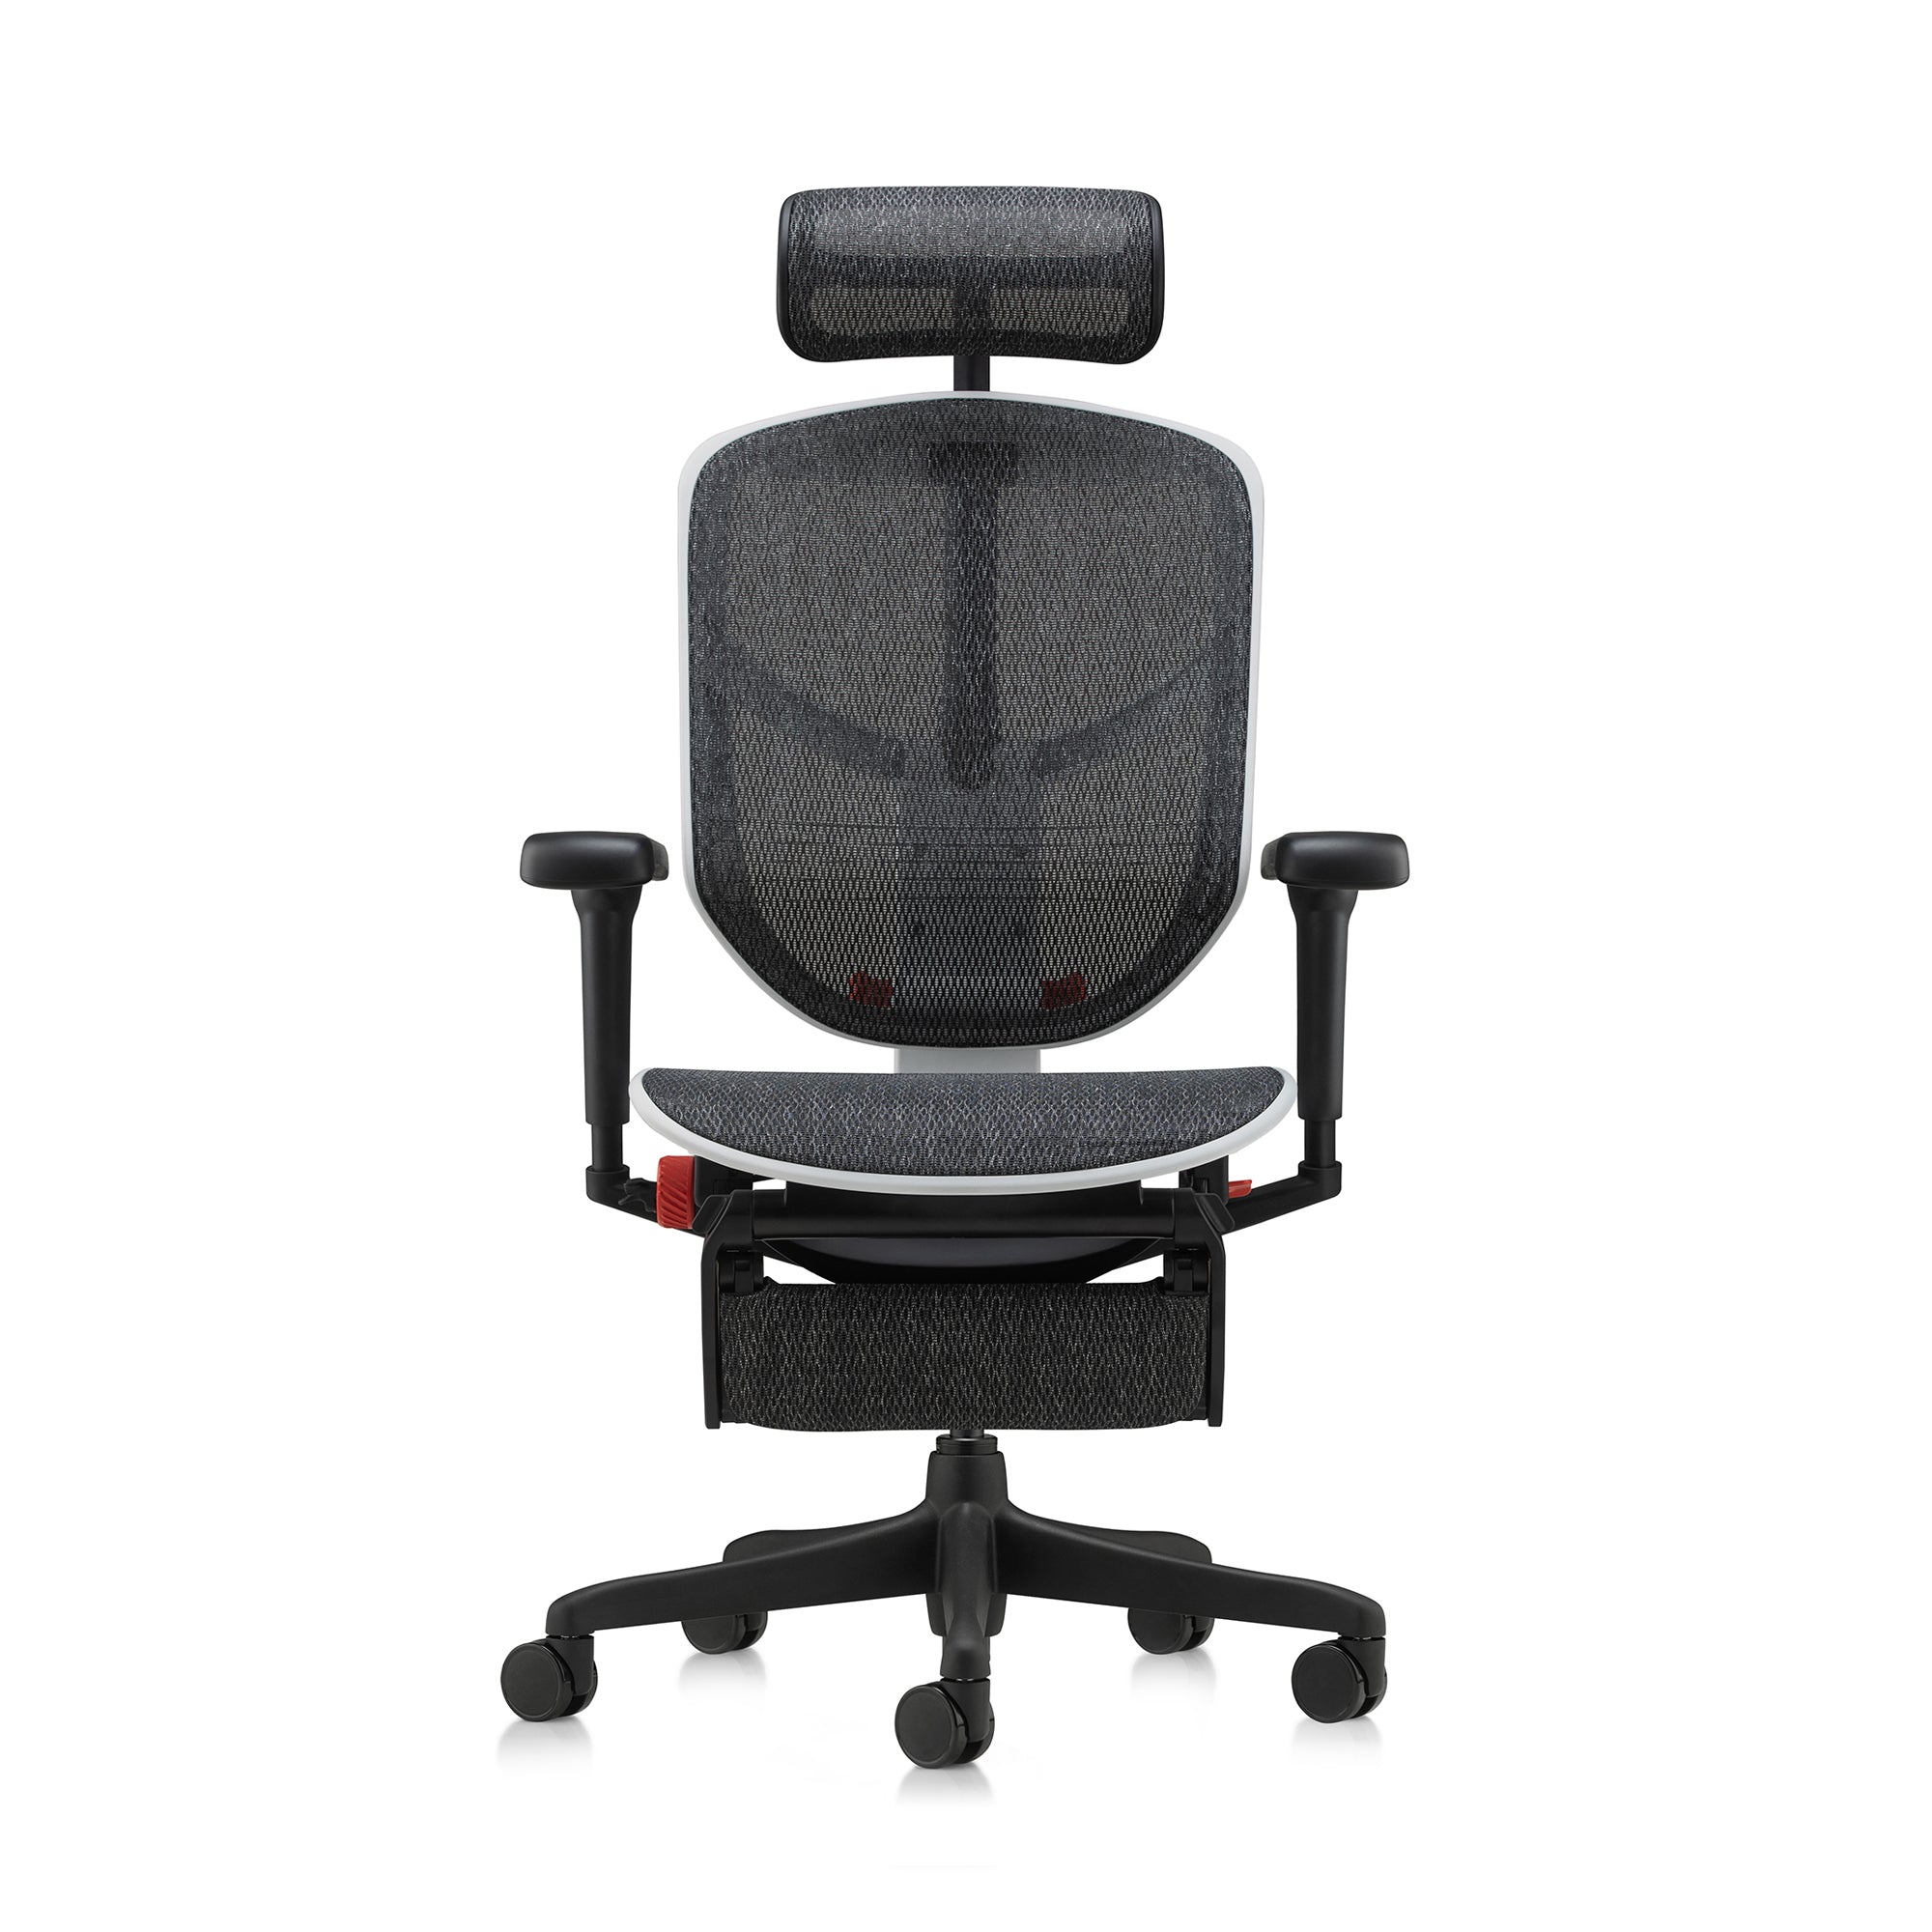 Ergohuman gaming chairs | Pro level comfort while you game